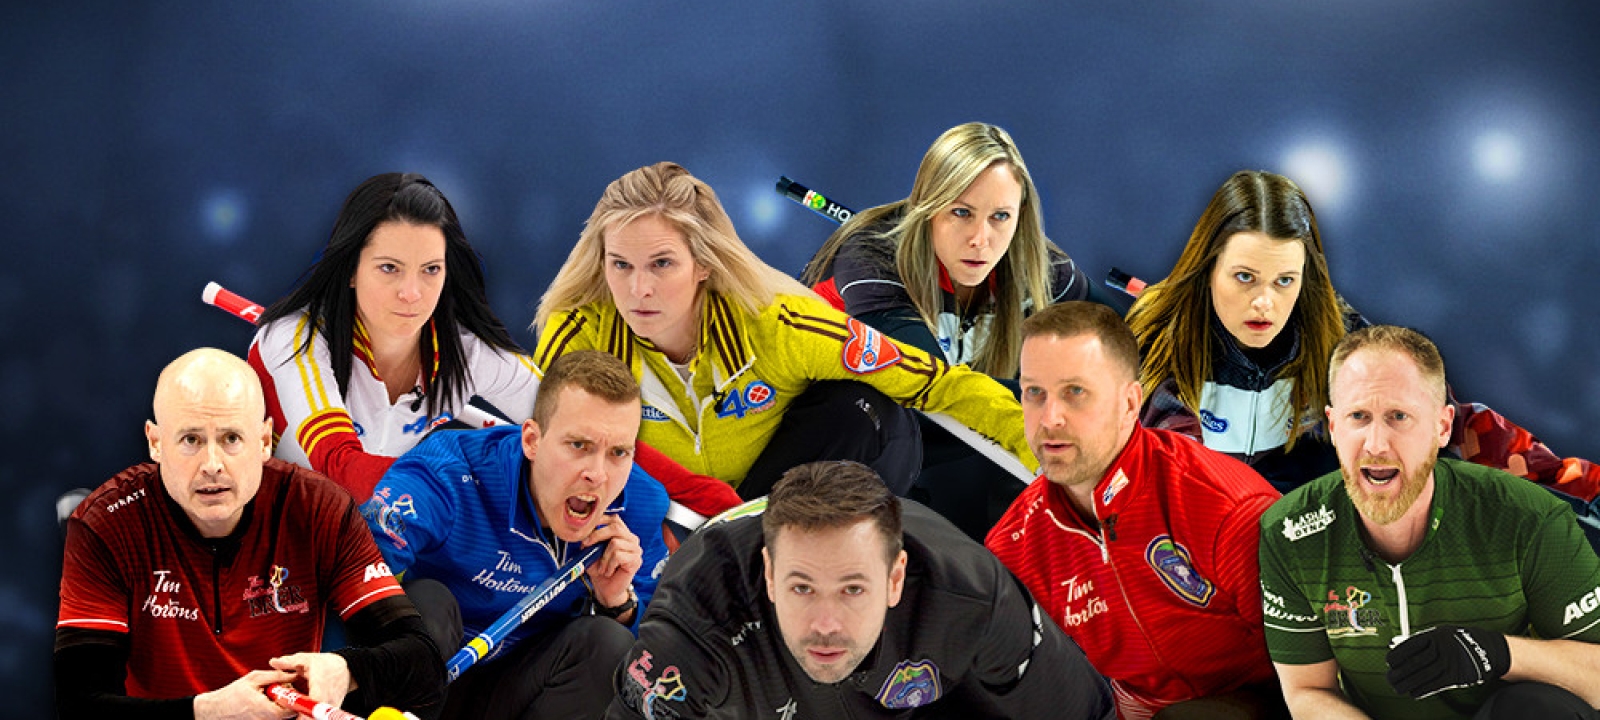 Curling is back!